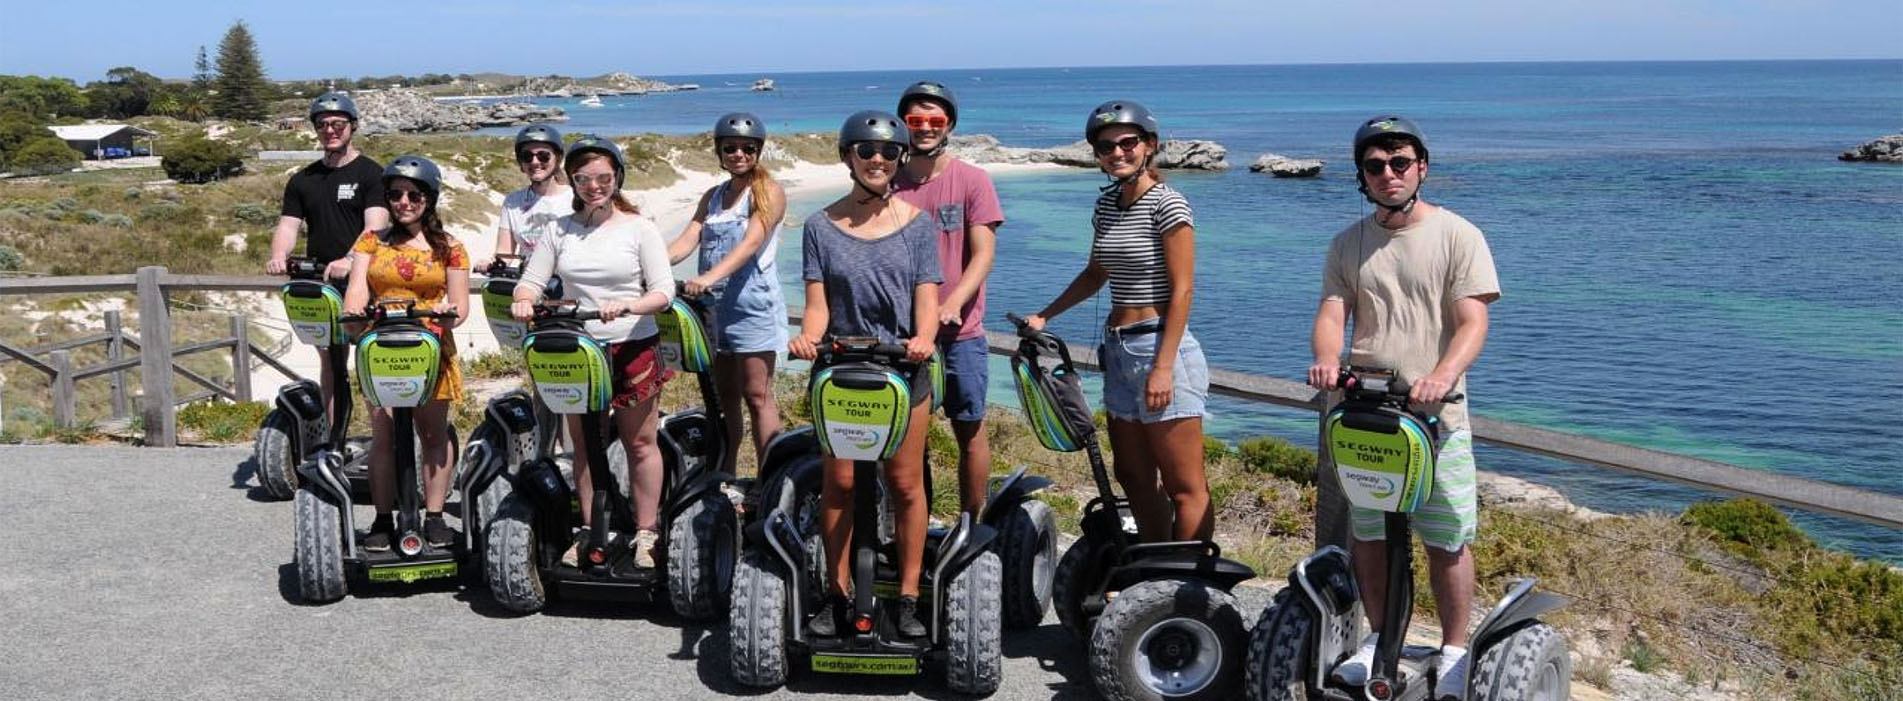 ROTTEST ISLAND SEGWAY tours people